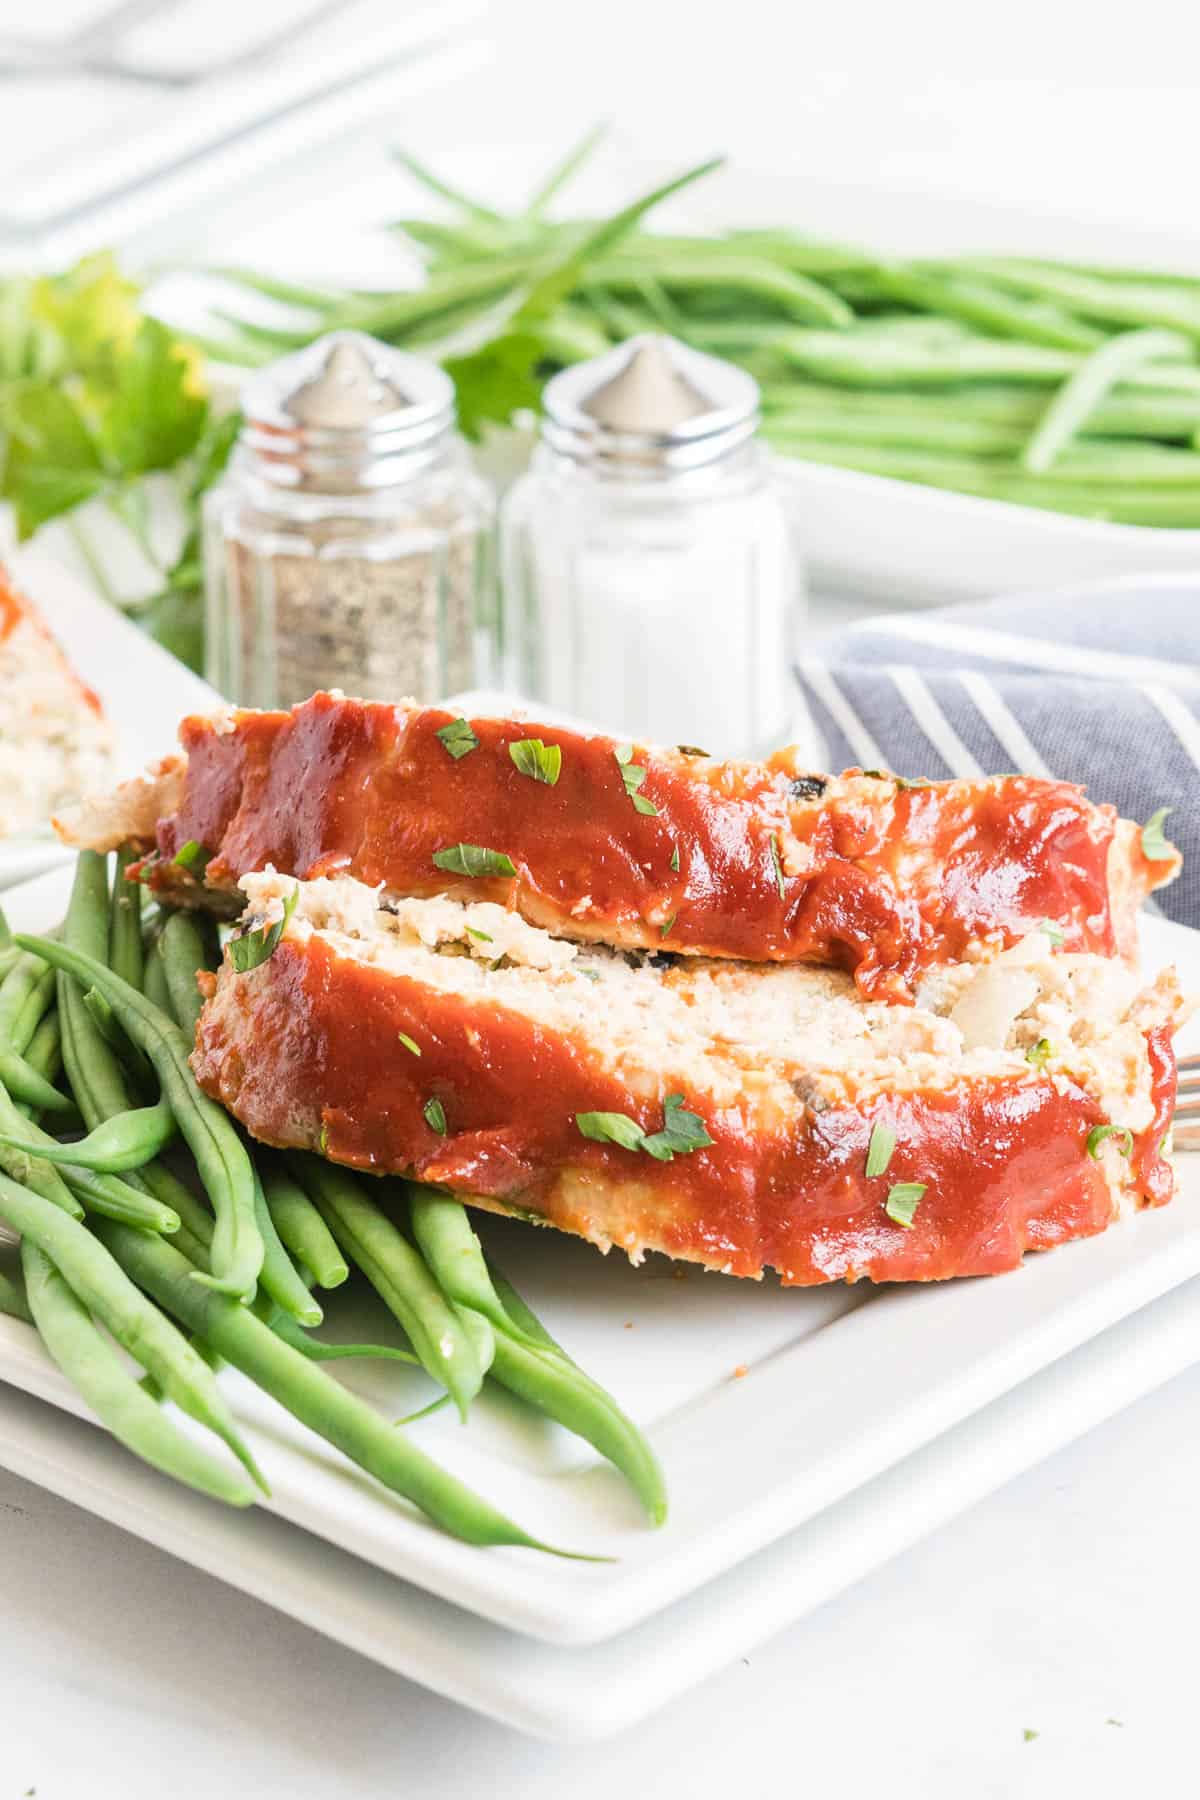 Two slices of meatloaf on a plate with green beans.